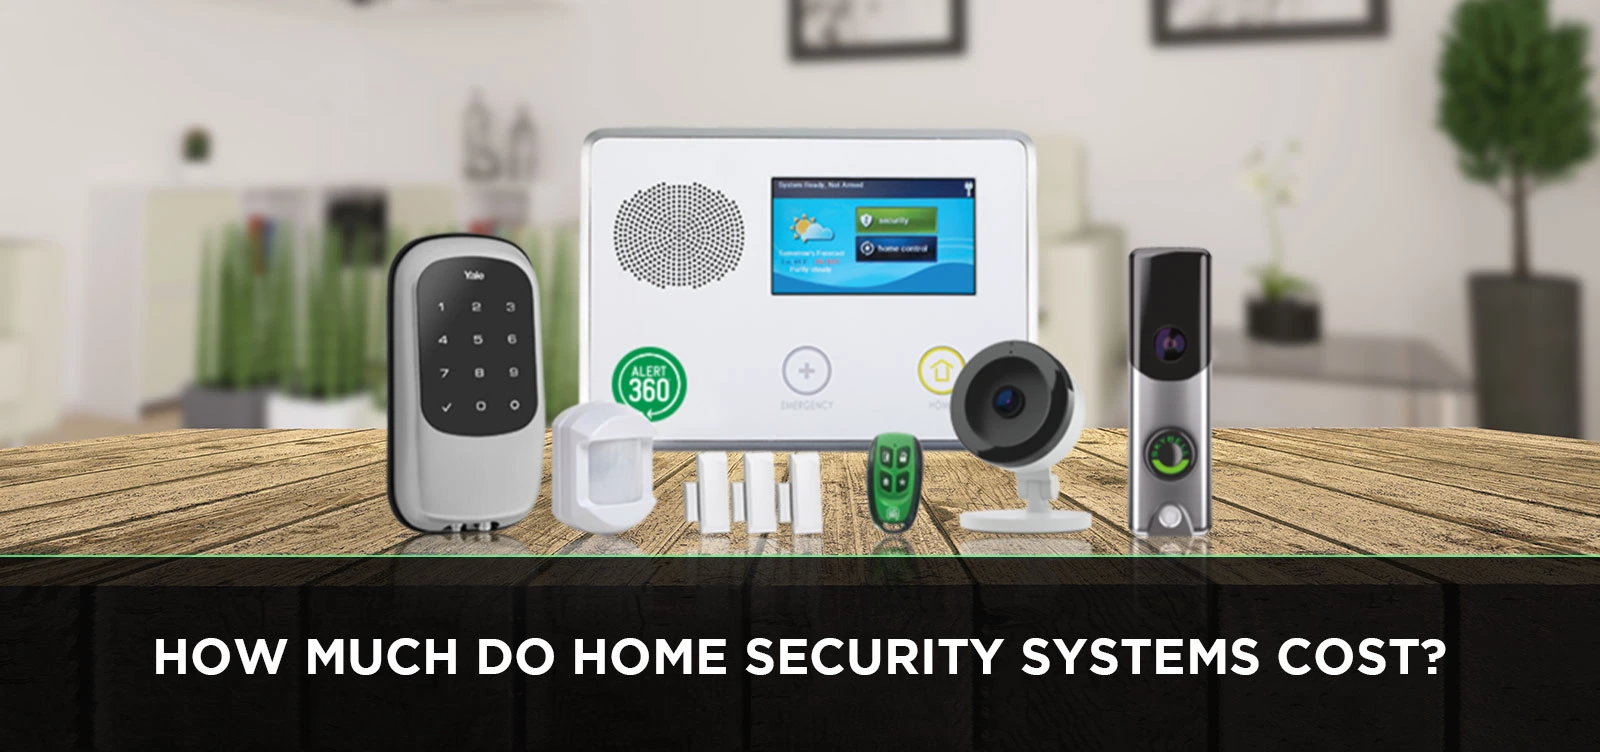 Home Security systems are a critical part of any residential property